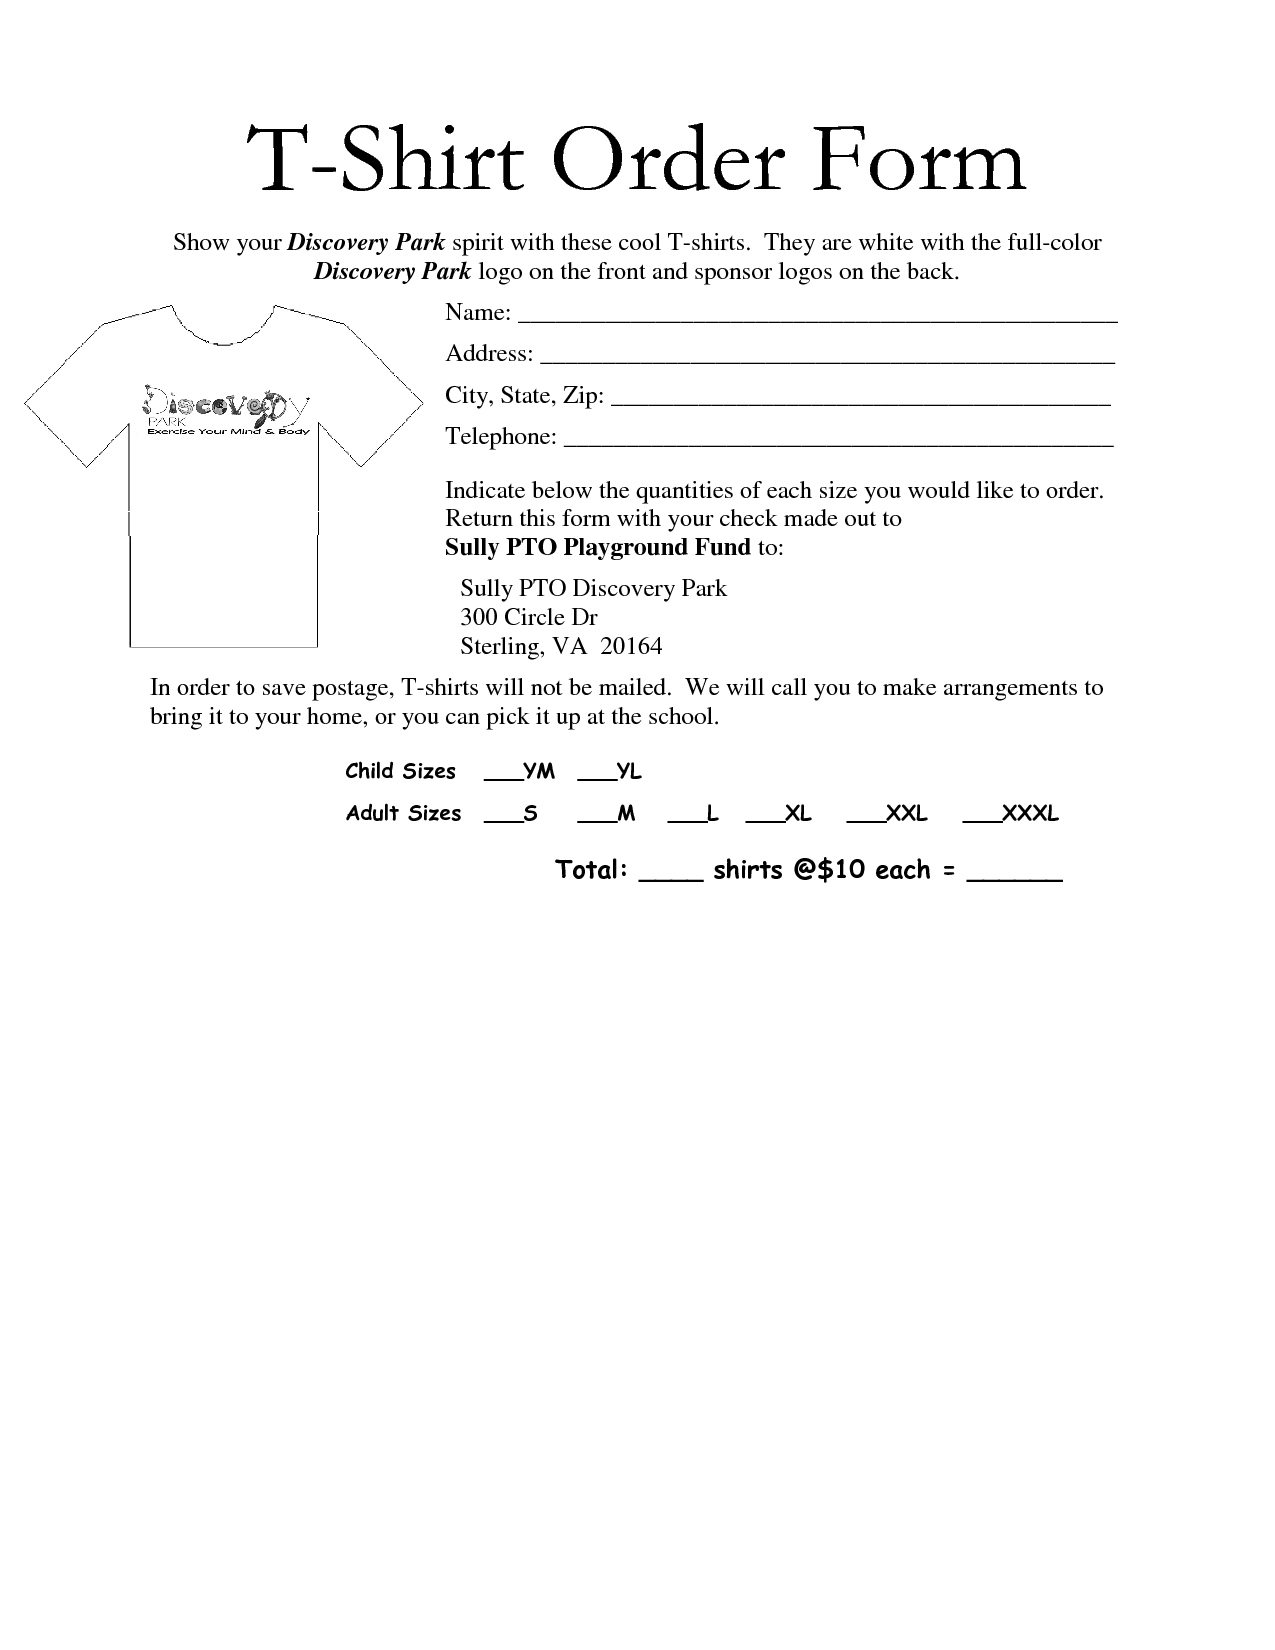 Cheerleading Donation Letter Template - 35 Awesome T Shirt order form Template Free Images